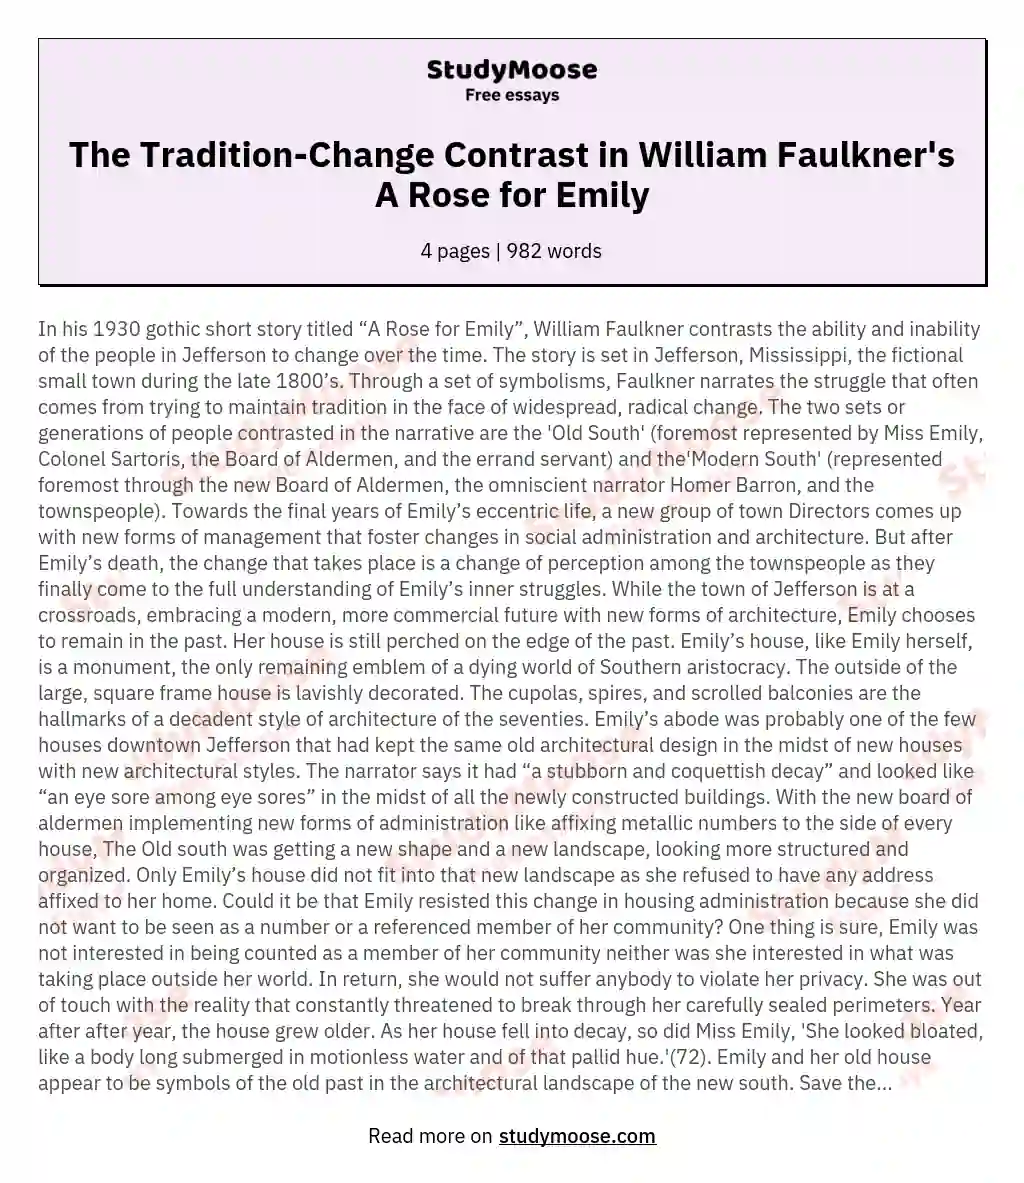 The Tradition-Change Contrast in William Faulkner's A Rose for Emily essay